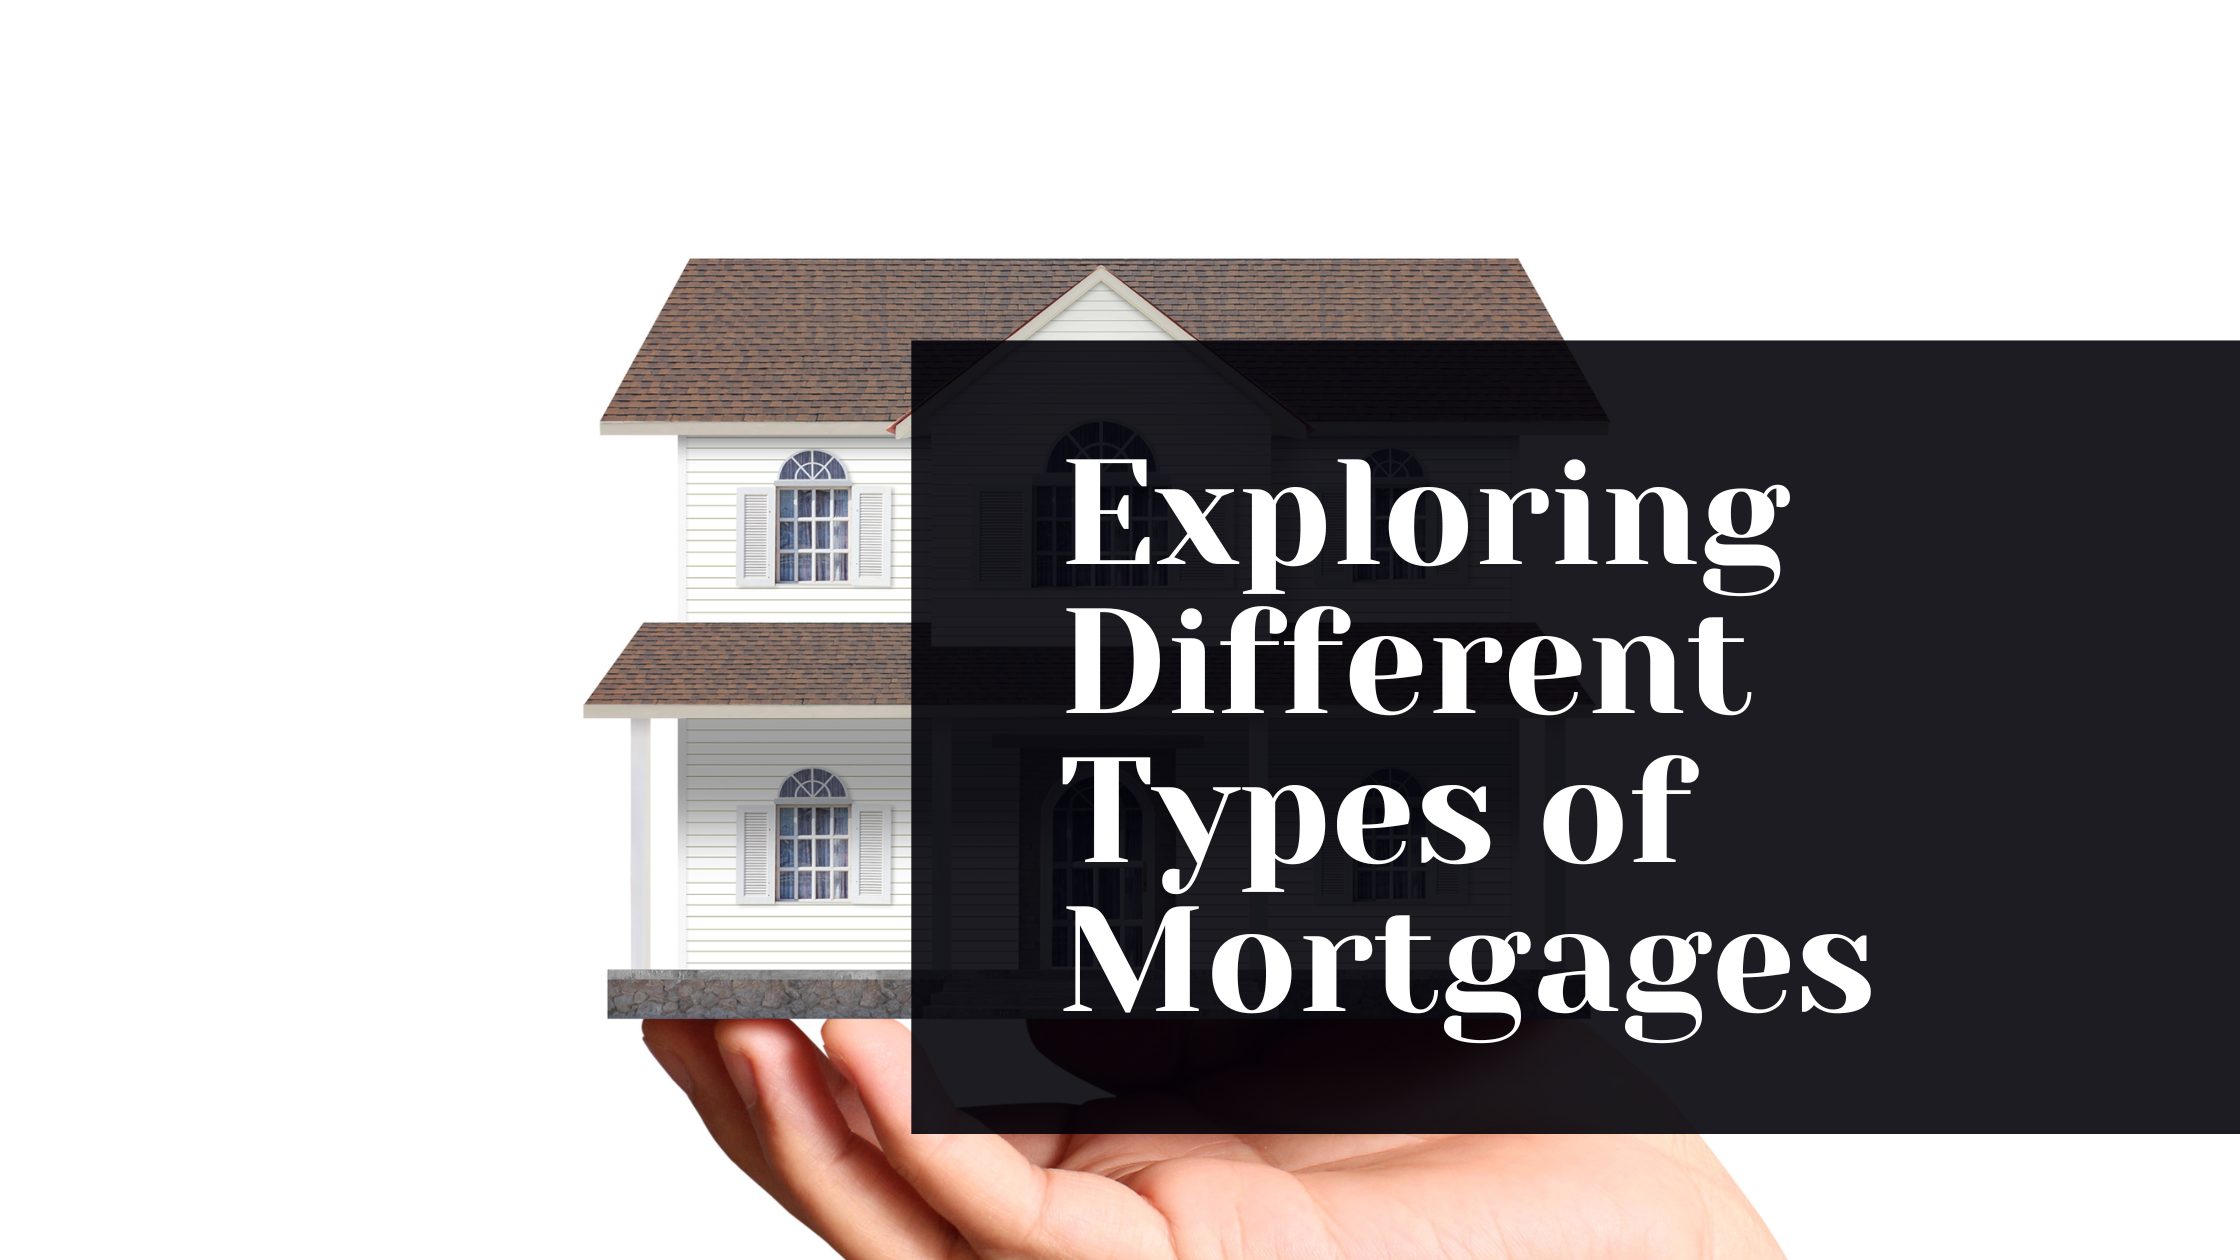 Image of a hand holding a house with the title of the blog hovering over it " Exploring Different Types of Mortgages